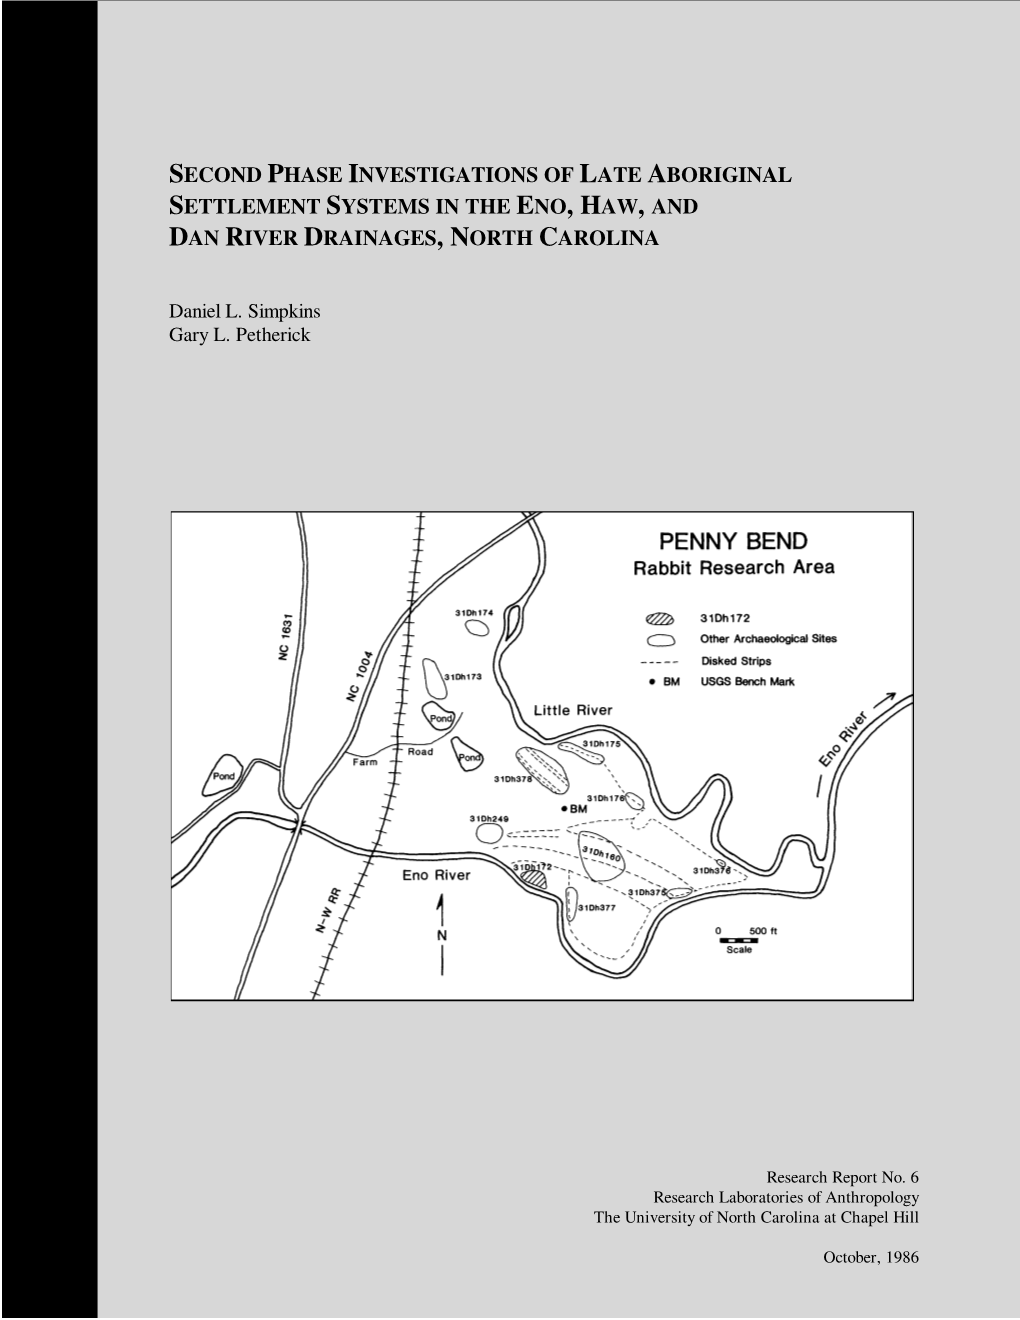 Second Phase Investigations of Late Aboriginal Settlement Systems in the Eno, Haw, and Dan River Drainages, North Carolina